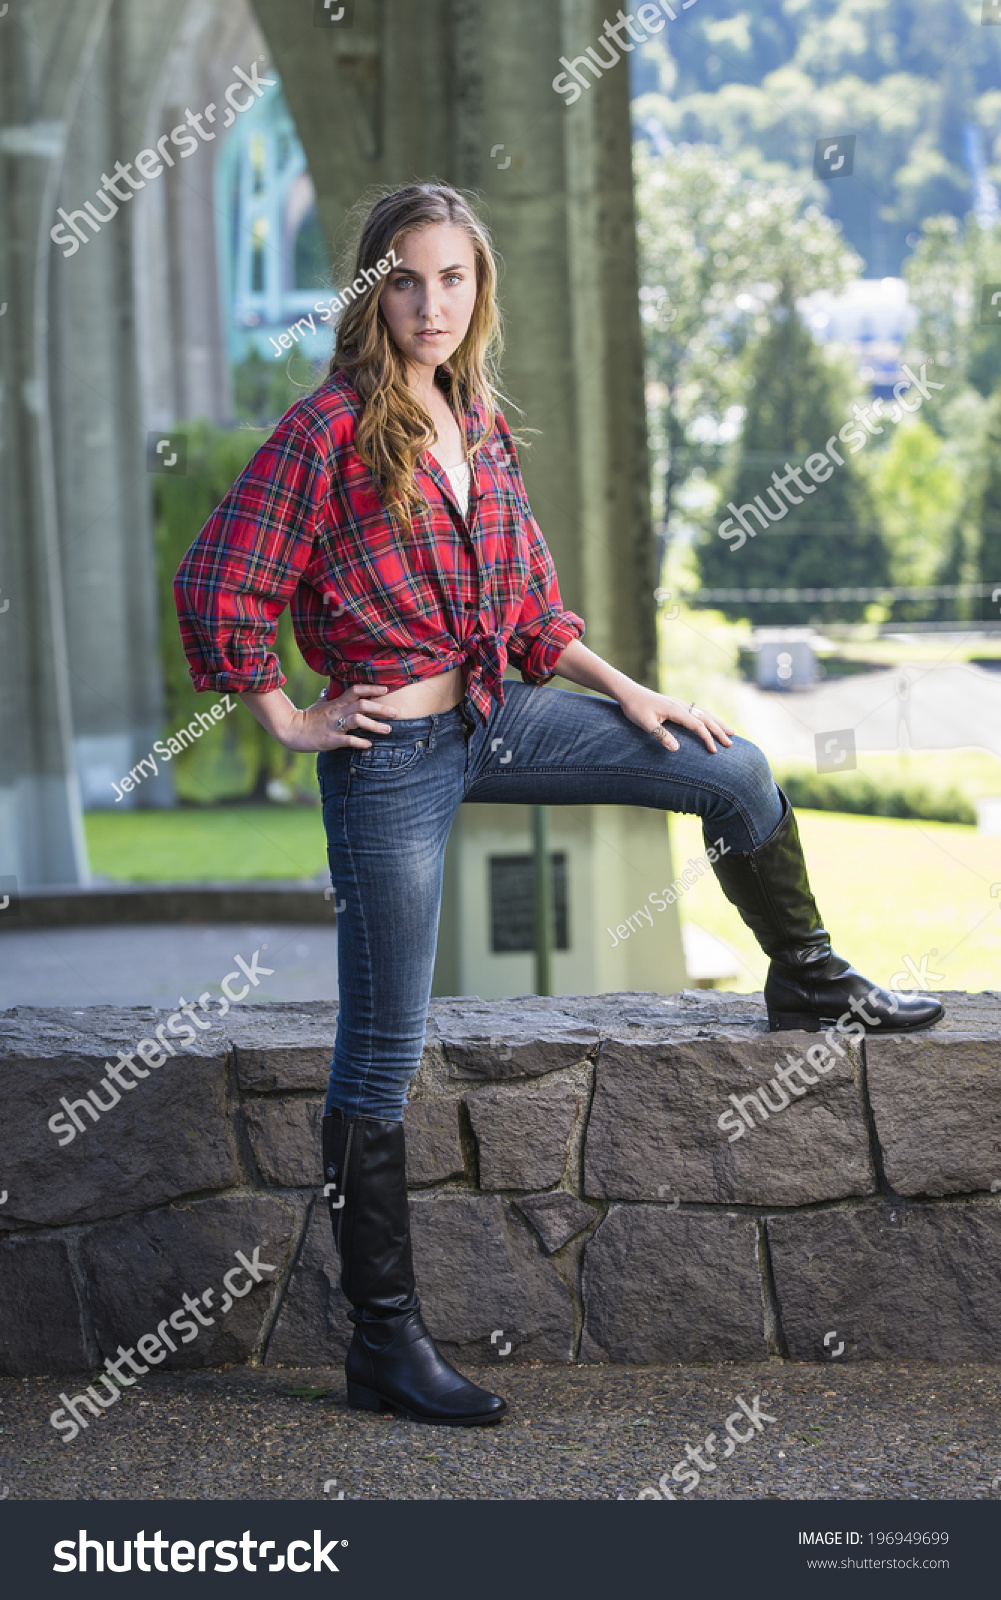 Teen With Boots 12